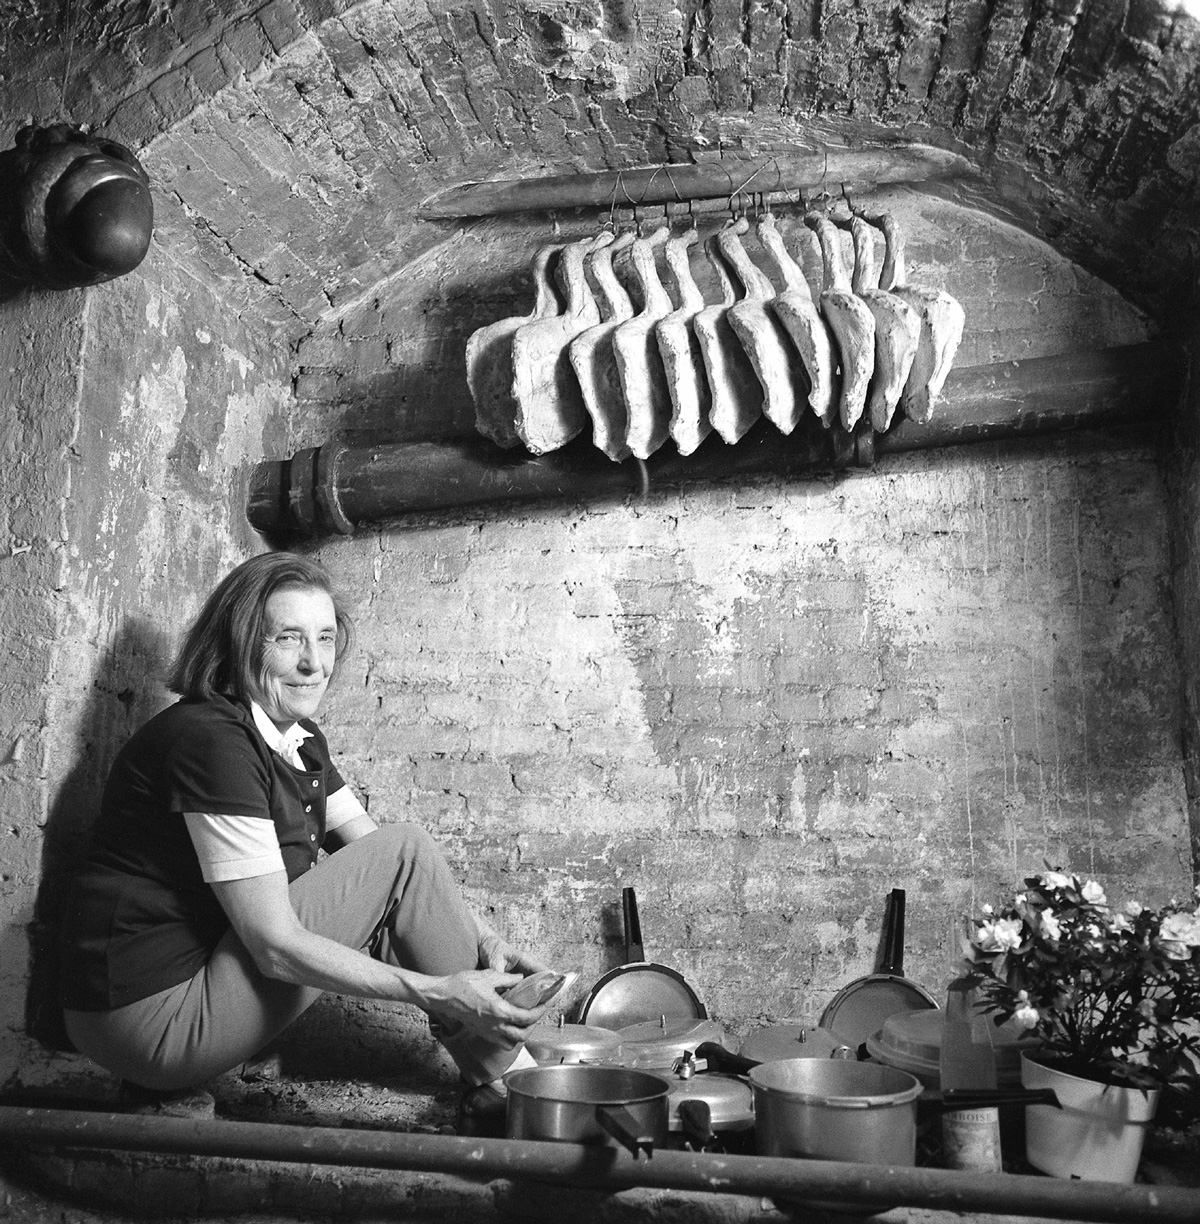 A photograph of Louise Bourgeois.